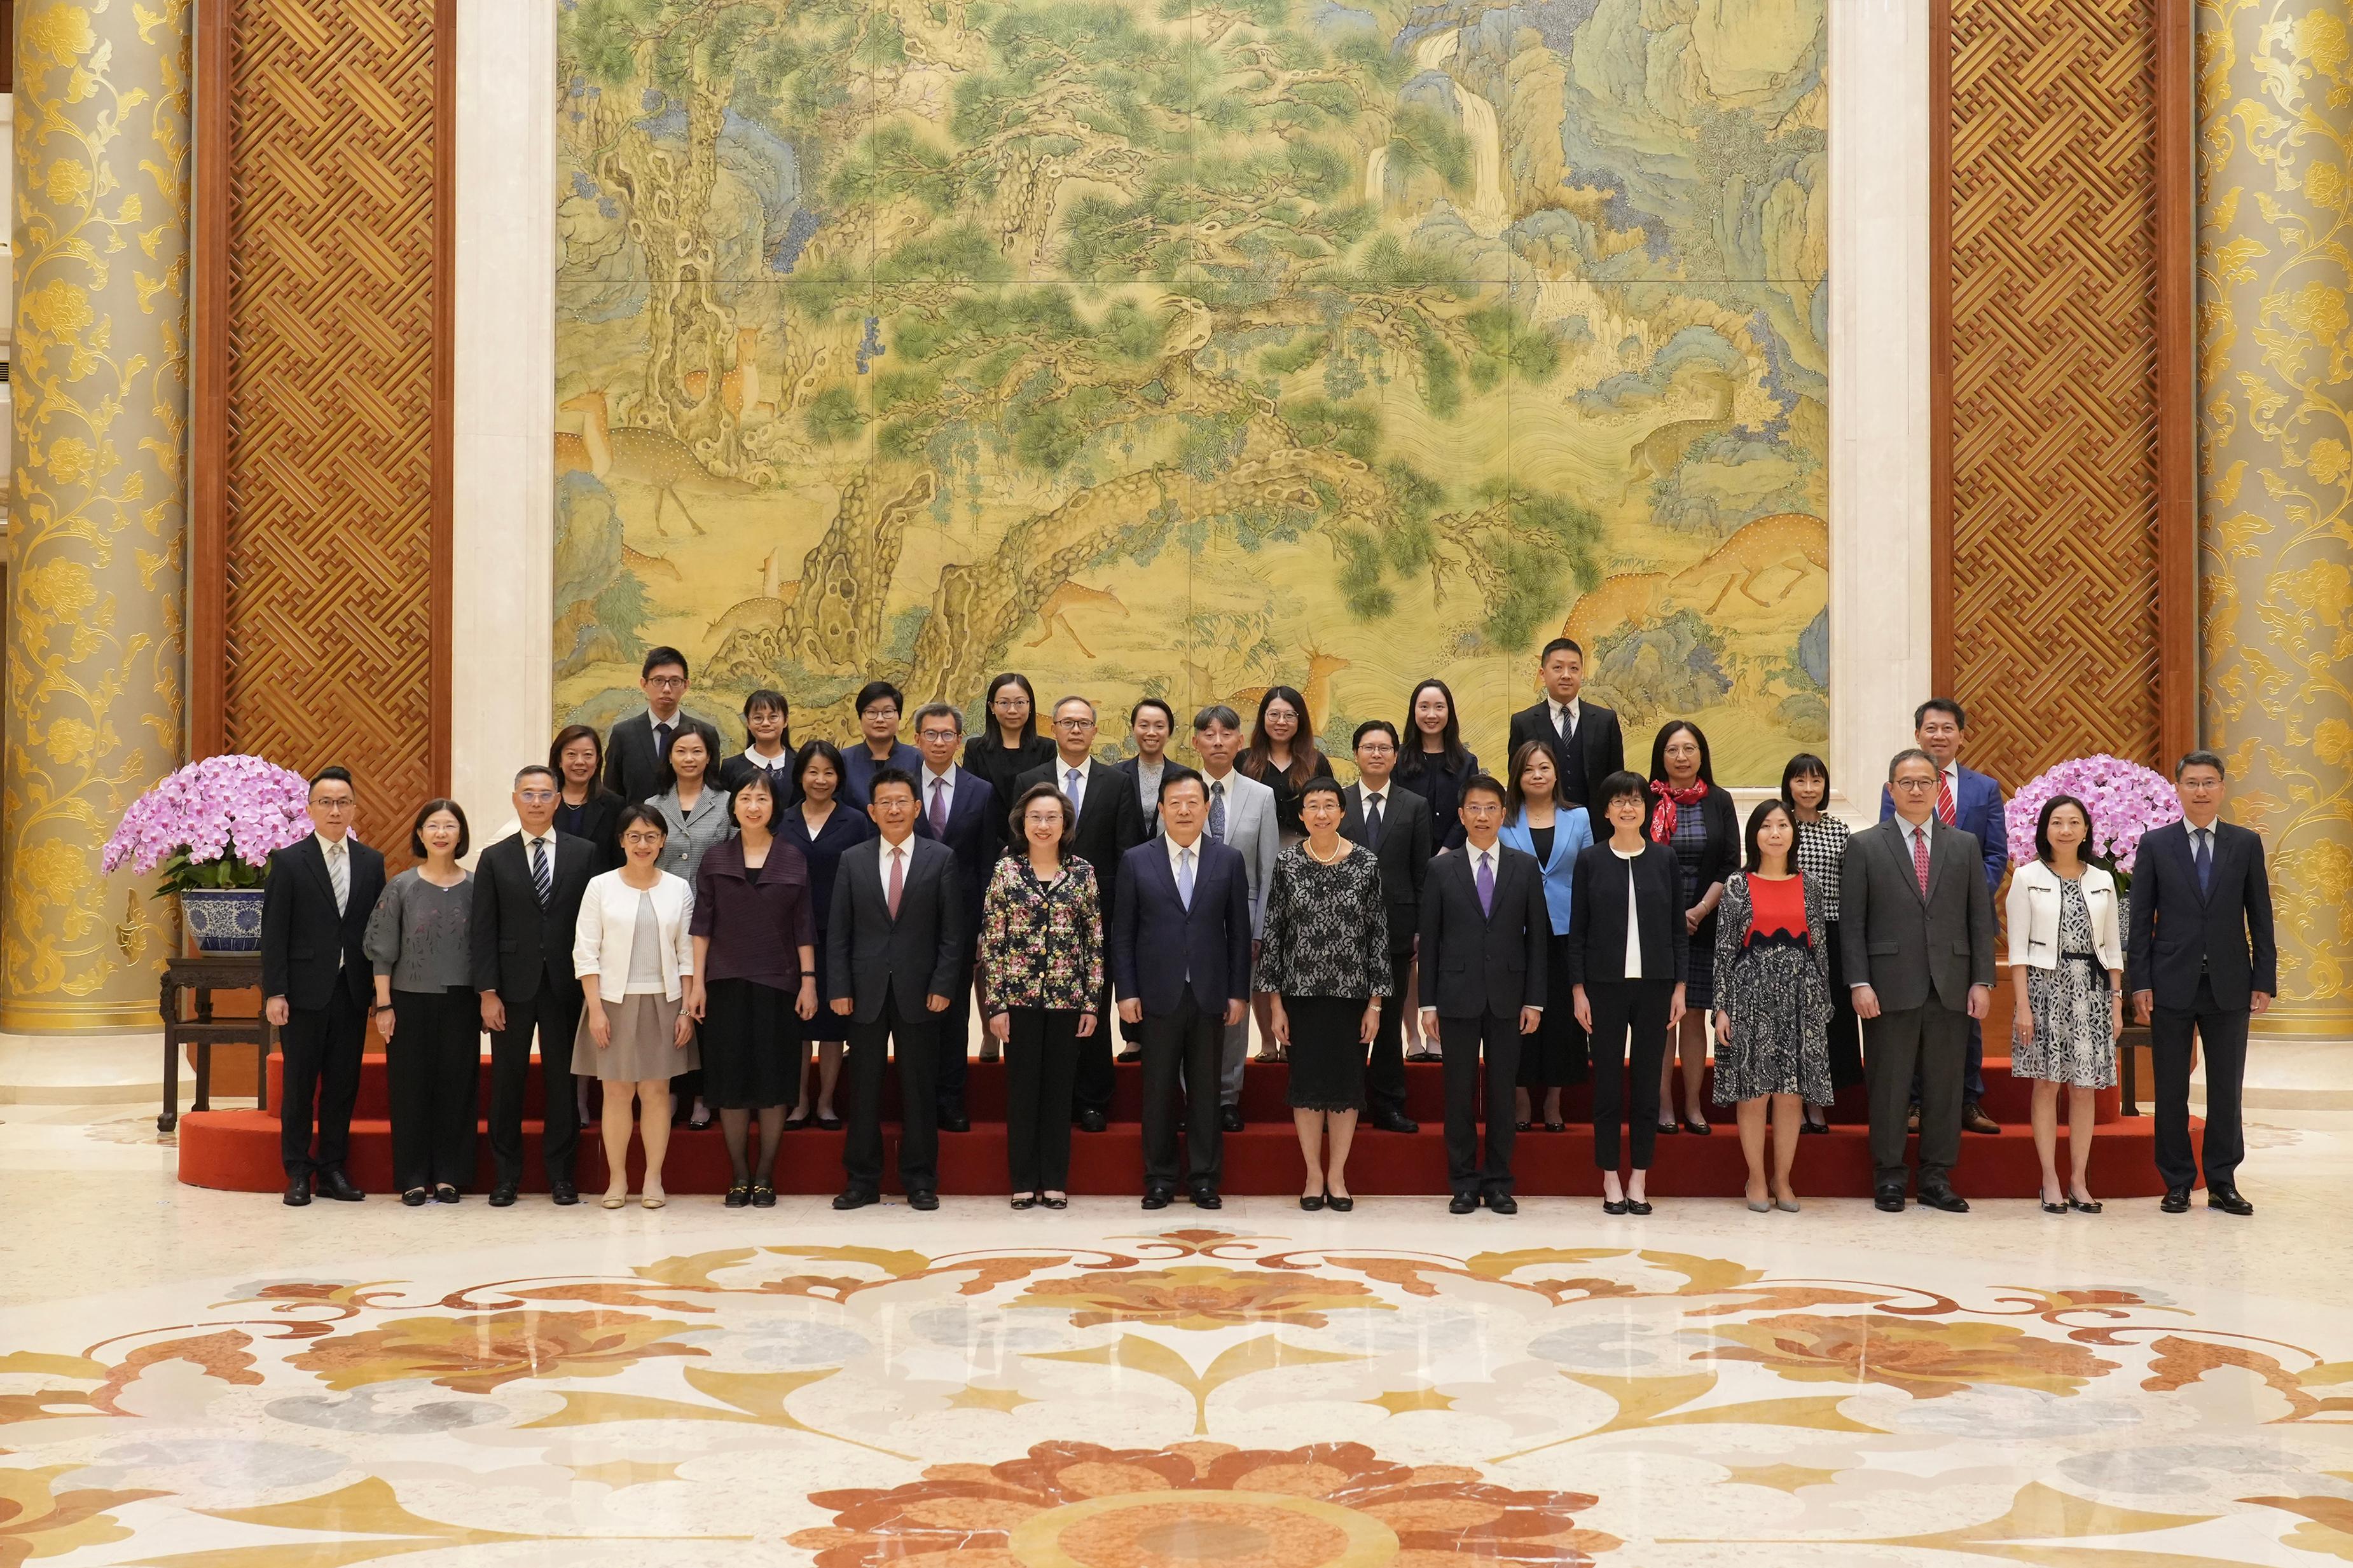 The Director of the Hong Kong and Macao Affairs Office of the State Council, Mr Xia Baolong (front row, centre), took a group photo with the delegation of HKSAR Government’s Permanent Secretaries and Heads of Departments for study and duty visit this afternoon (June 26).